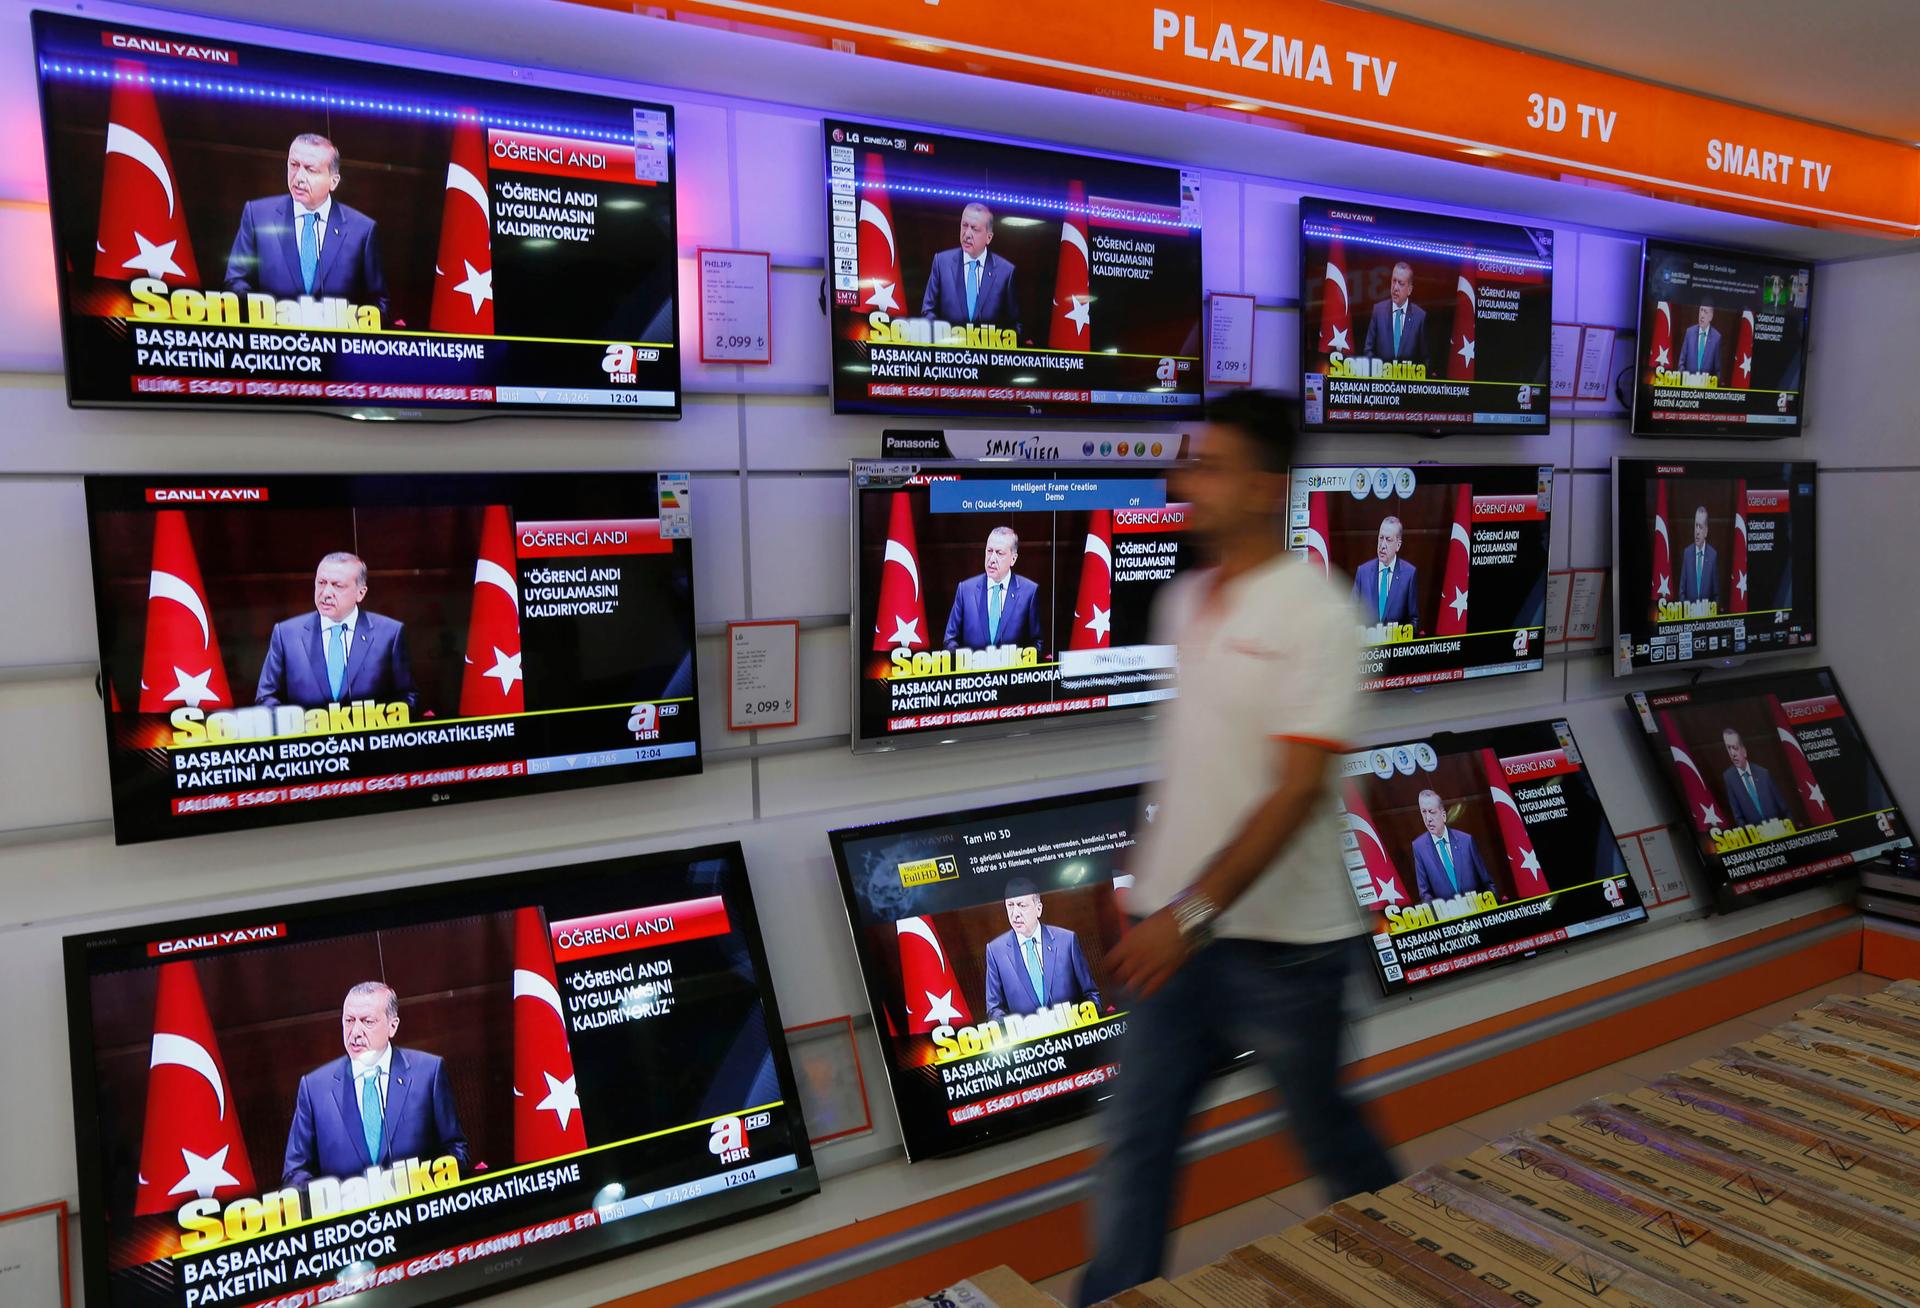 A news conference of Turkish Prime Minister Tayyip Erdogan is screened on televisions at an electronics shop in Istanbul September 30, 2013. Erdogan announced a so-called "democratization package" that would allow for education in languages other than Tur